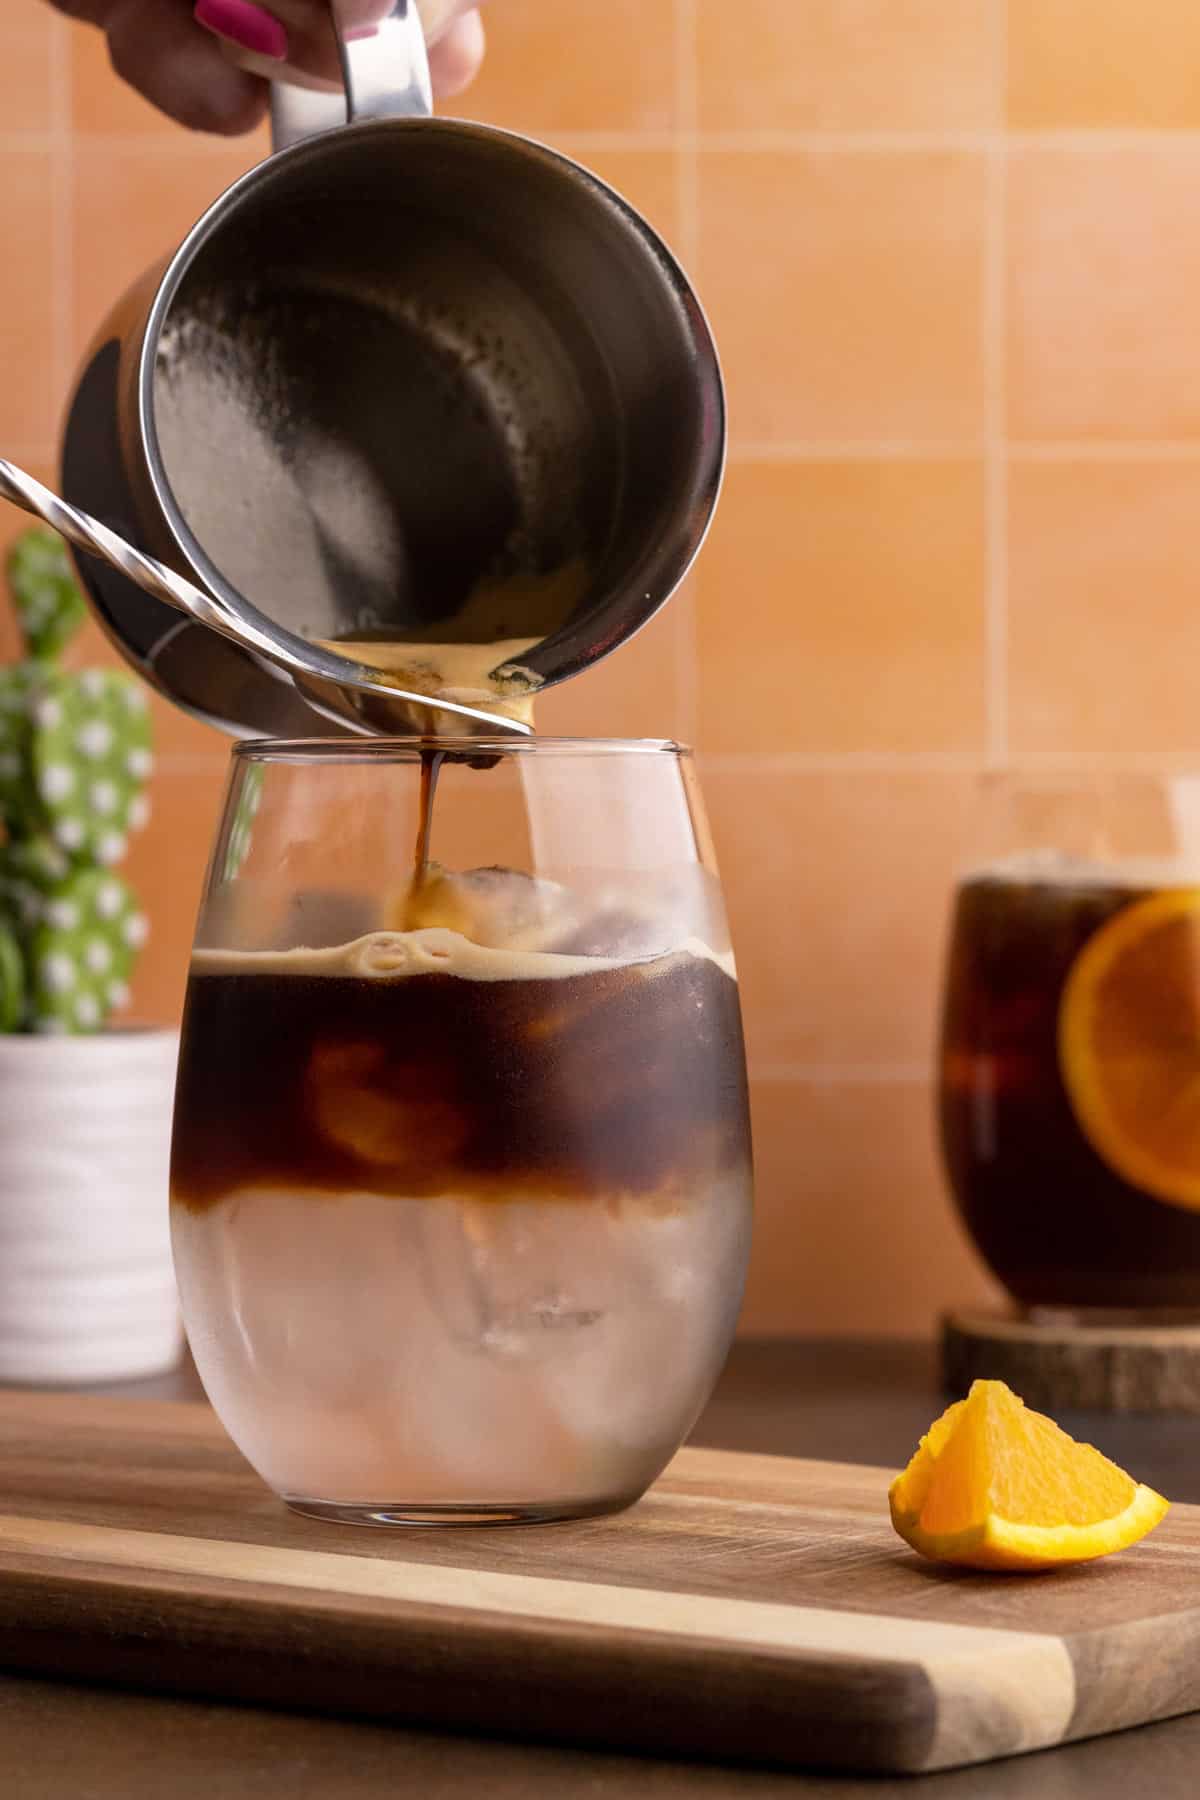 Pouring espresso into a glass with tonic water.